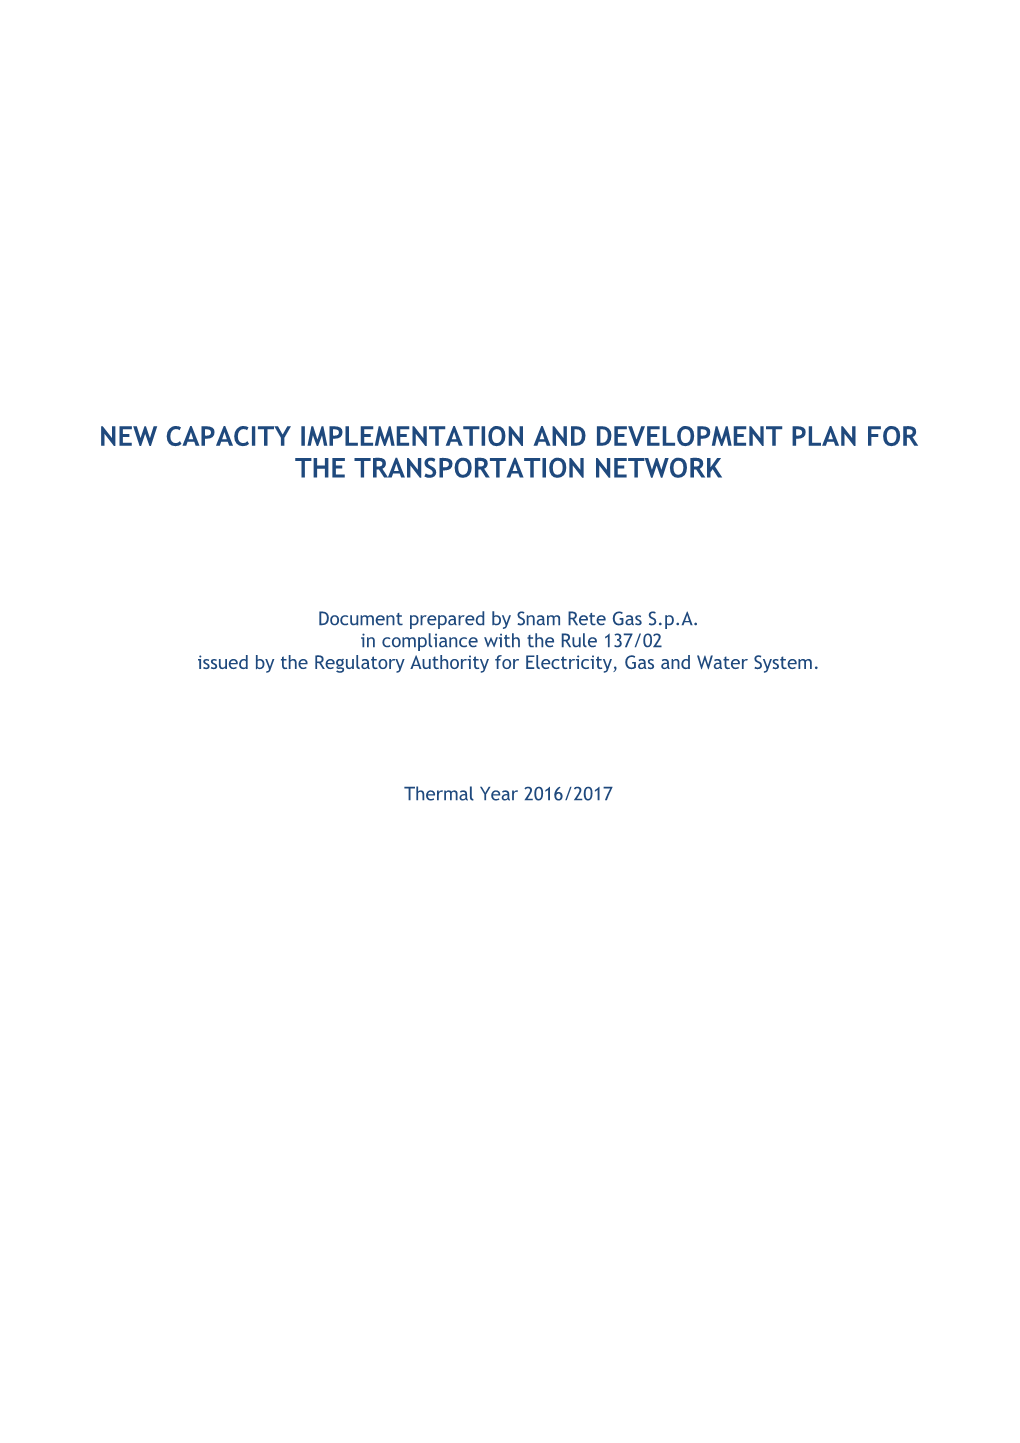 New Capacity Implementation and Development Plan for the Transportation Network